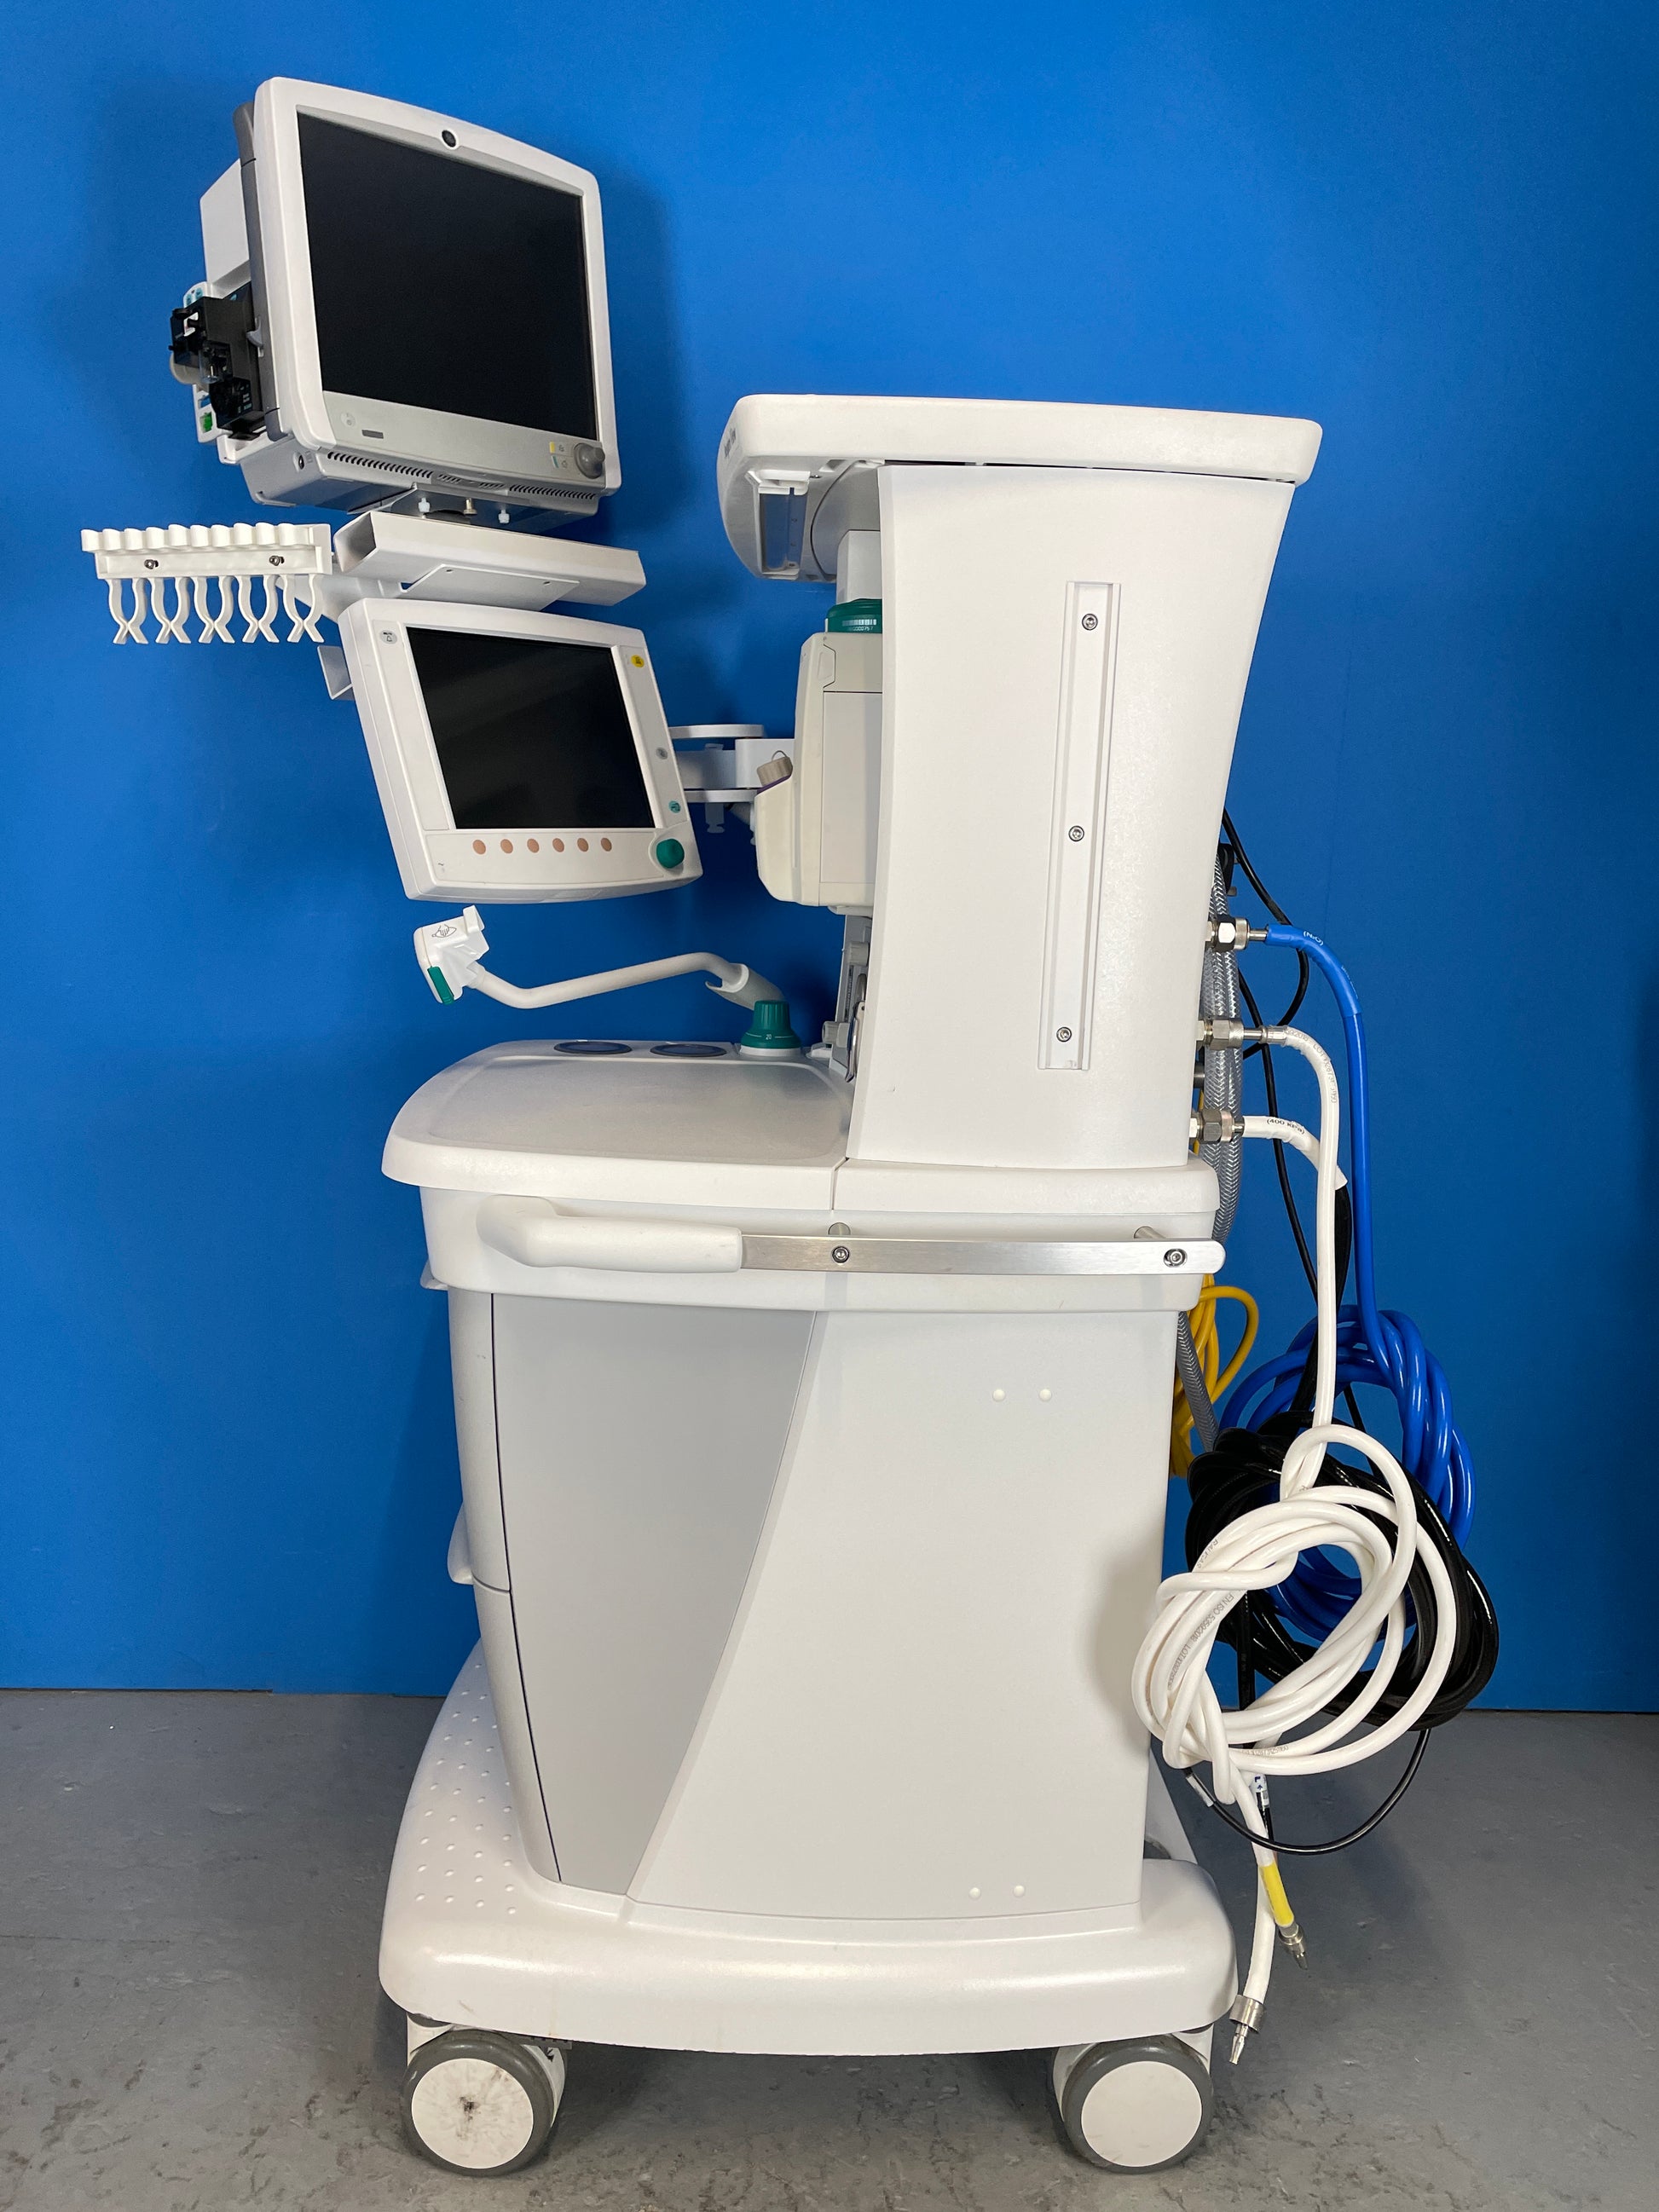 GE Datex Ohmeda Aespire View is a compact, integrated, intuitive anesthesia delivery system. The ventilator provides mechanical ventilation to a patient during surgery and monitors and displays various patient parameters.